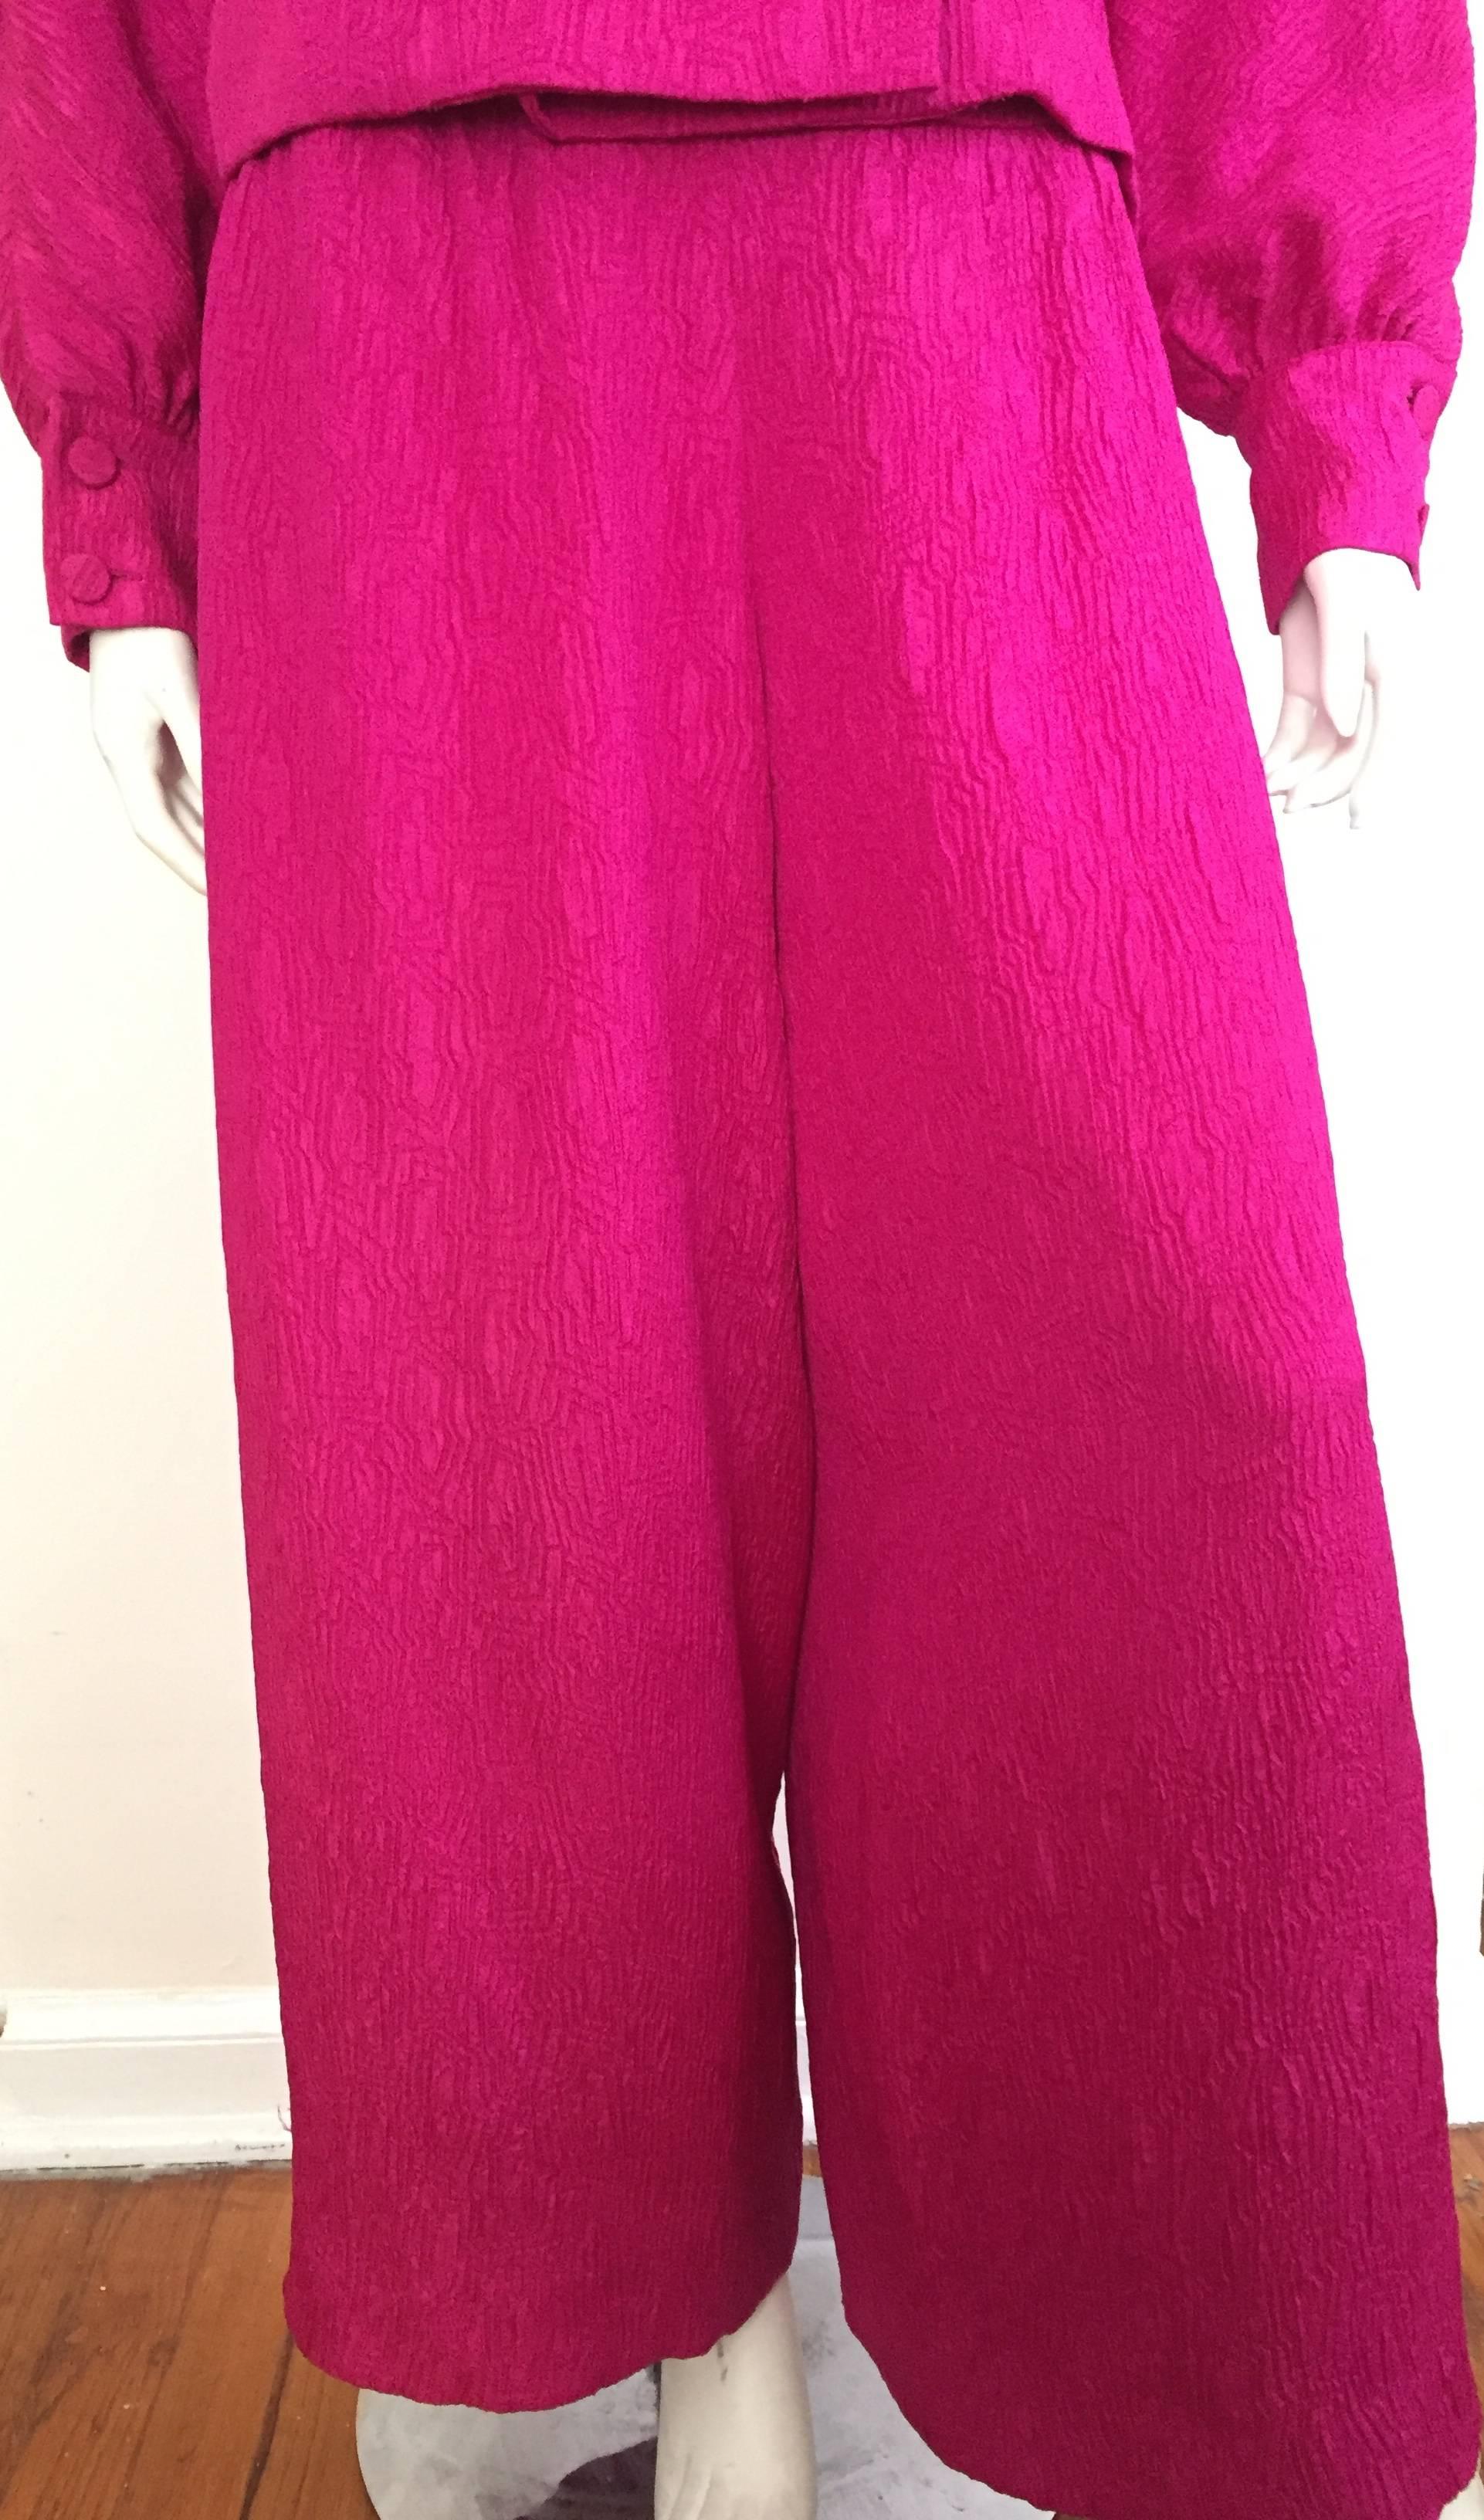 Adele Simpson Silk Pink Jacket and Palazzo Pants Size 6, 1980s In Excellent Condition For Sale In Atlanta, GA